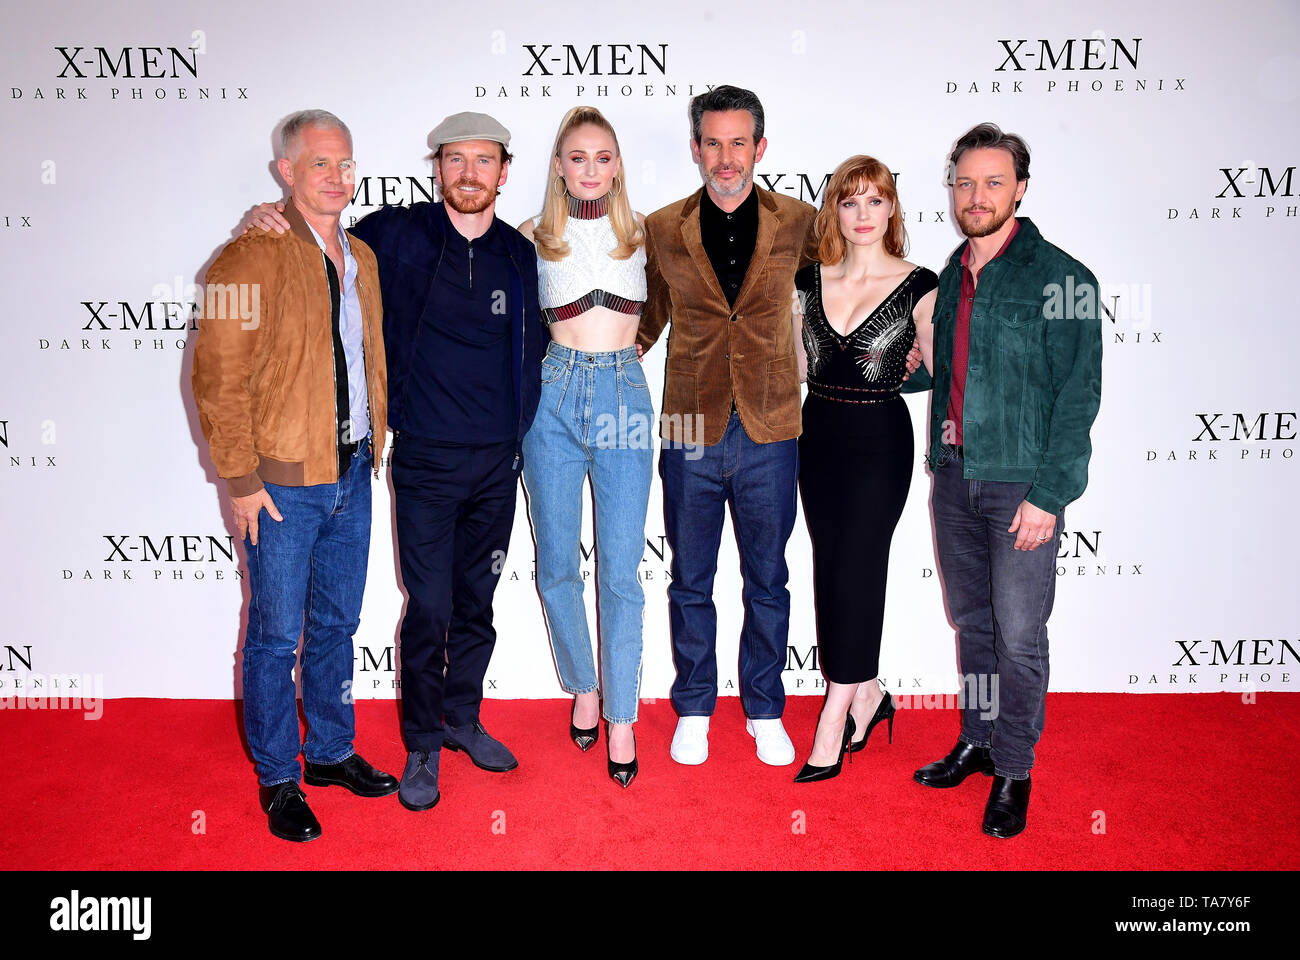 Hutch Parker (left to right), Michael Fassbender, Sophie Turner, Simon Kinberg, Jessica Chastain, James McAvoy attending the X-Men: Dark Phoenix photocall held at Picturehouse Central, London. Stock Photo